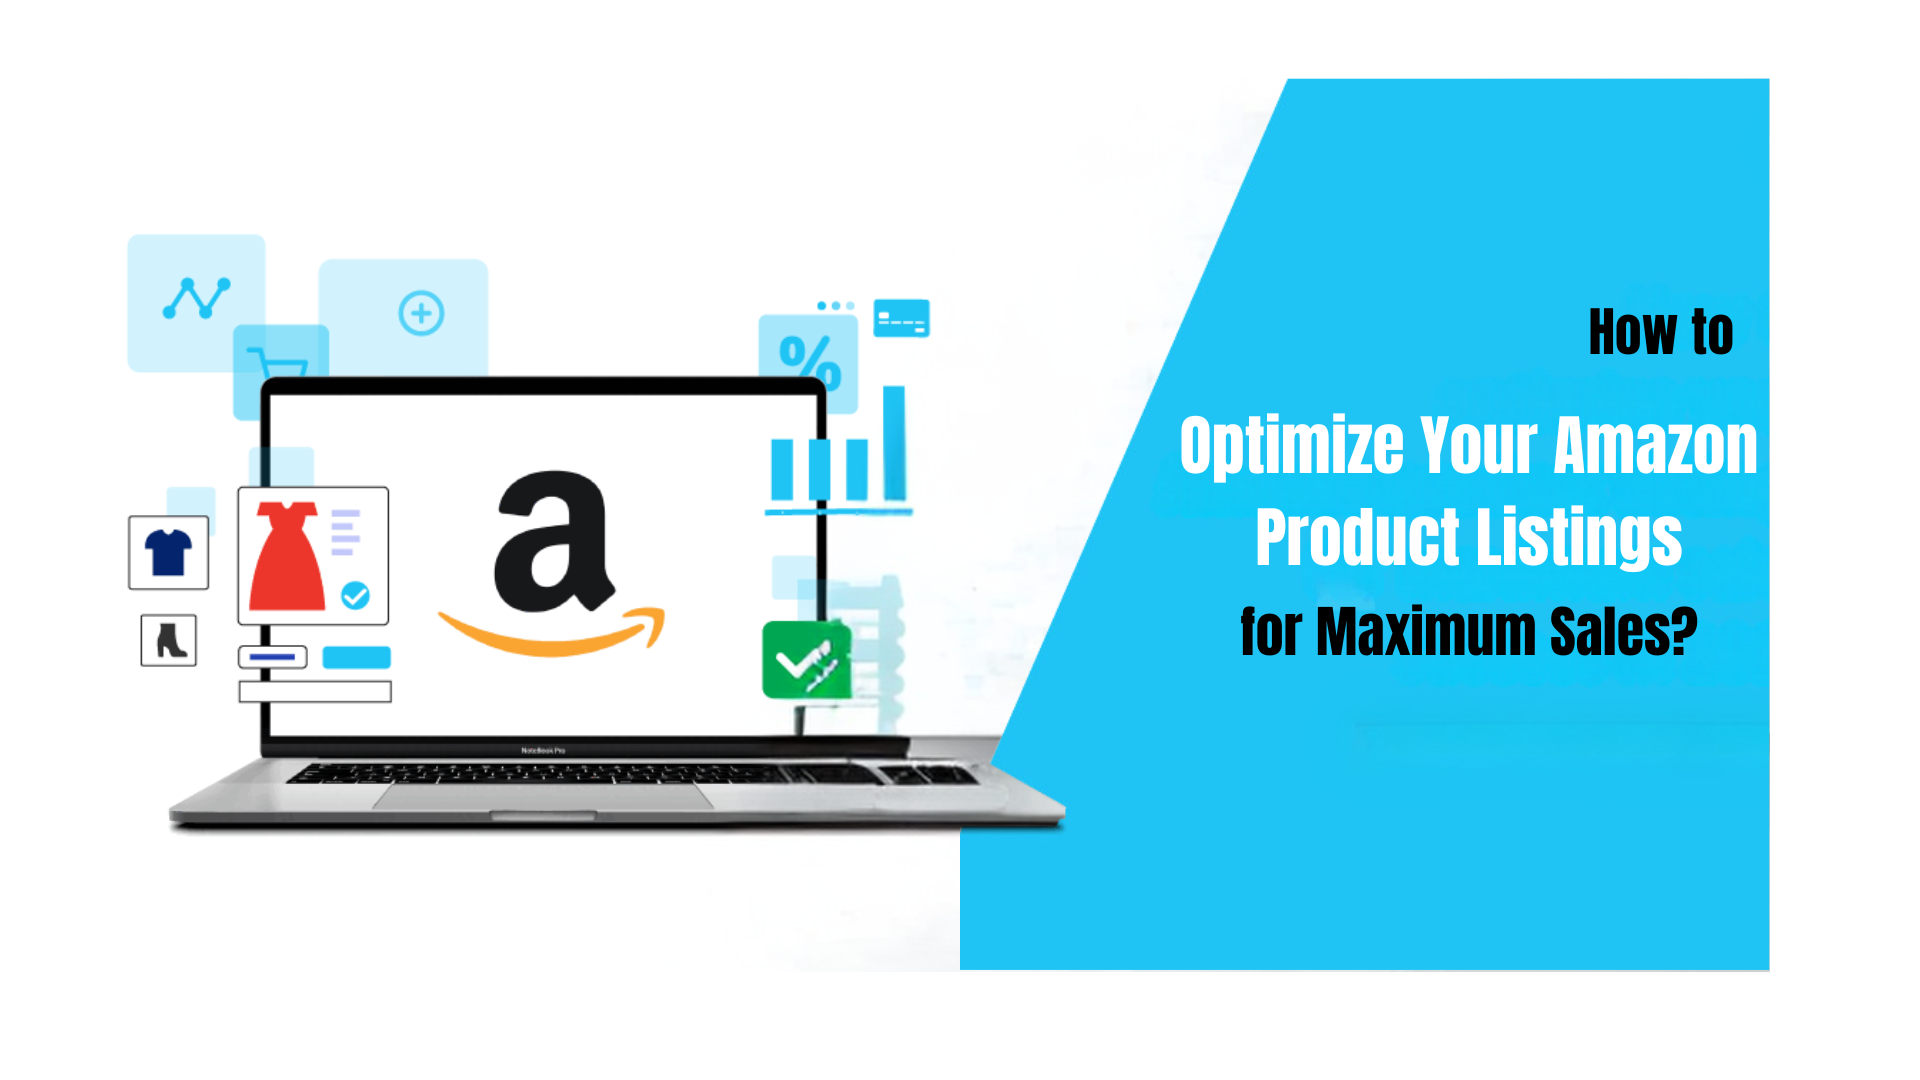 How to Optimize Your Amazon Product Listings for Maximum Sales?